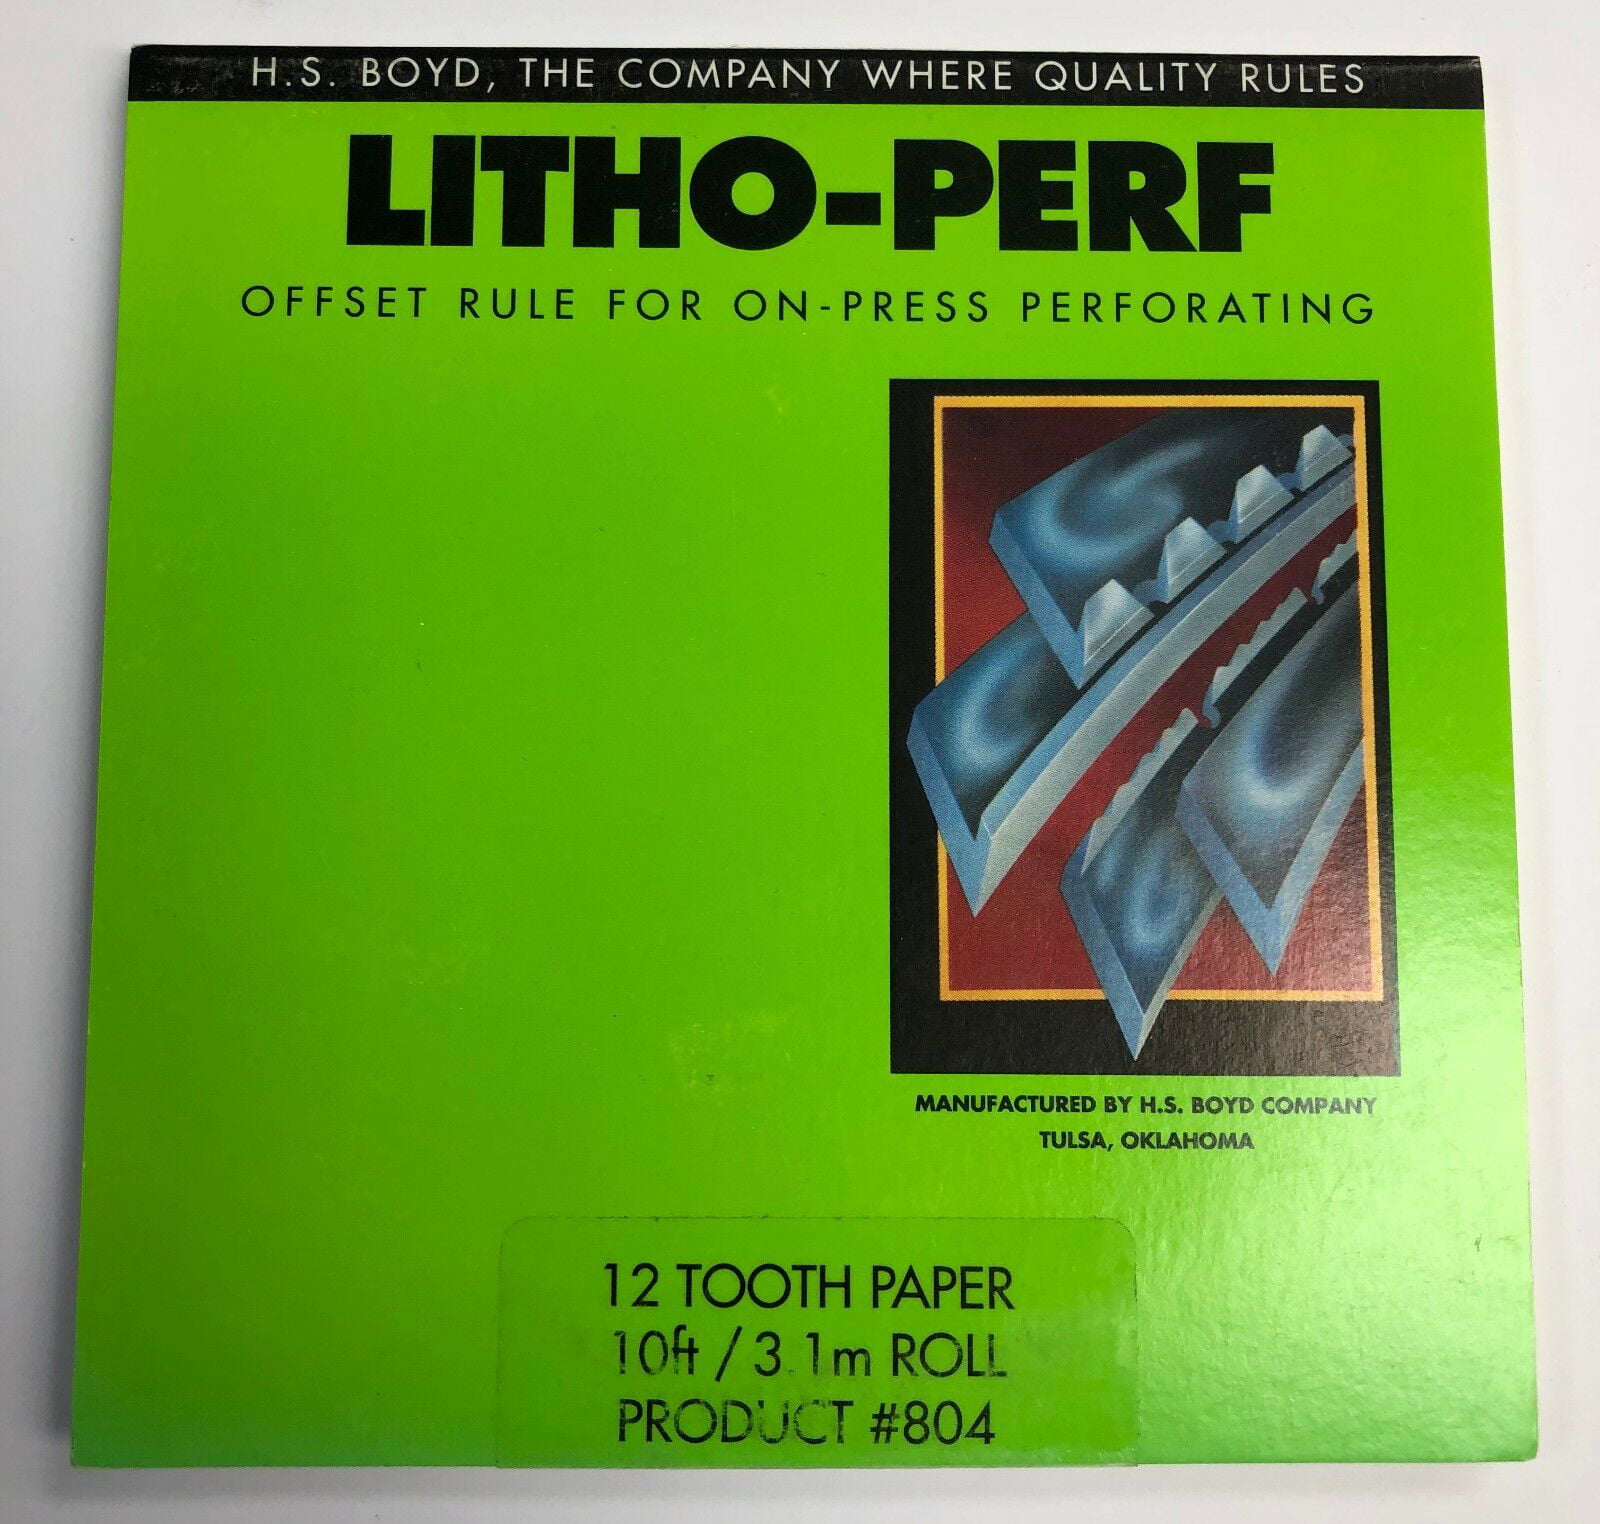 HS BOYD Litho-Perf 12 Tooth Paper Product # 804 Litho Perf Bindery Supplies 